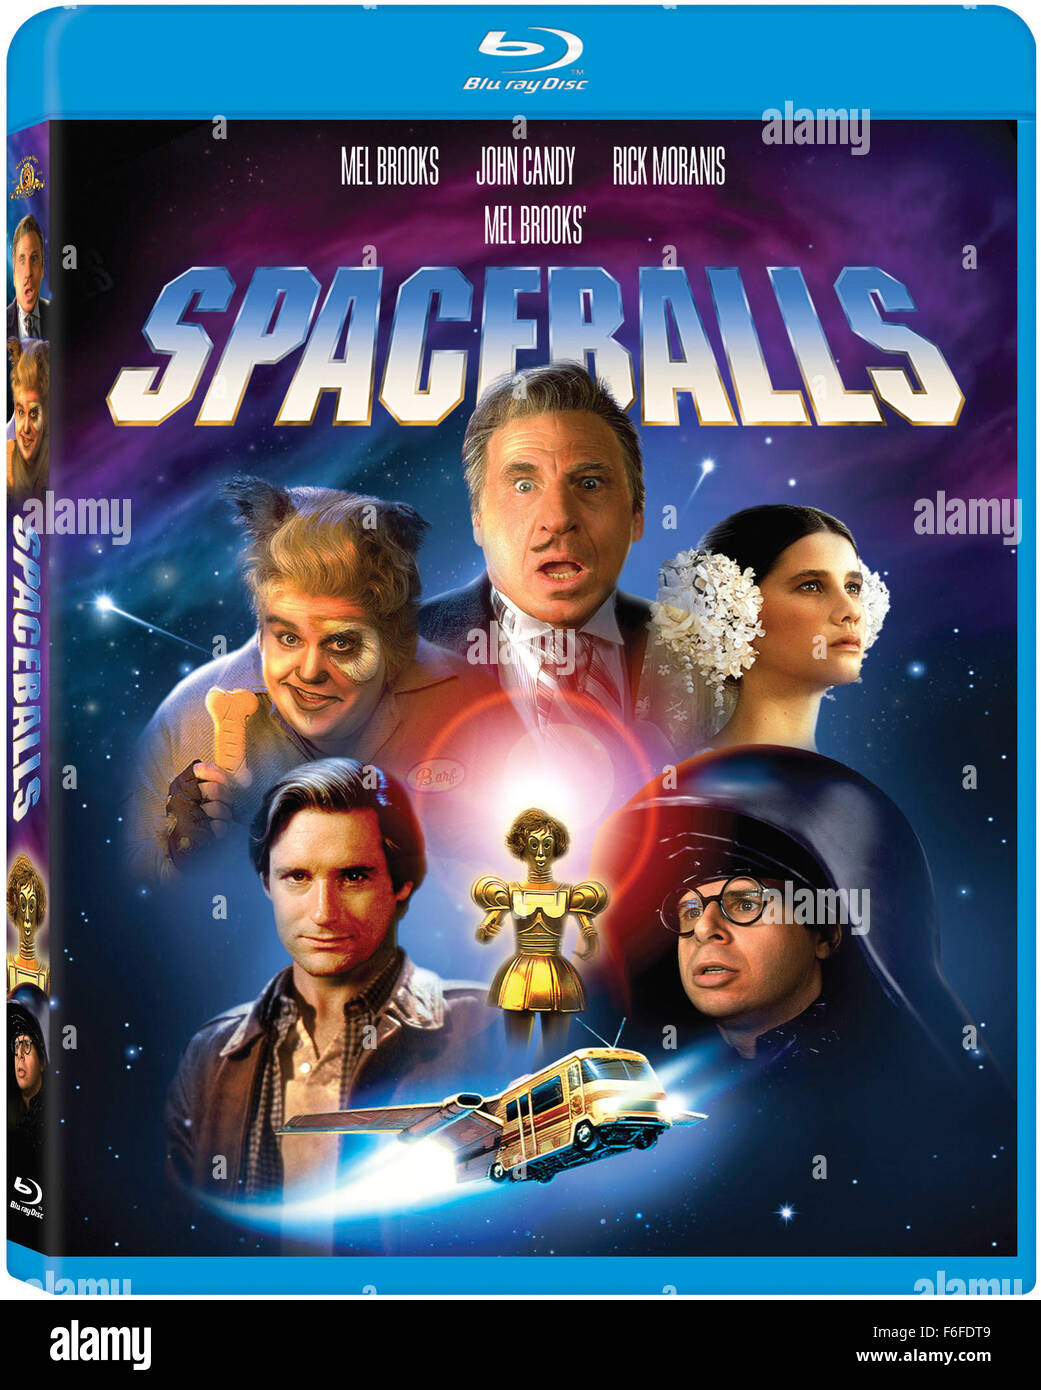 Release Date June 24 1987 Movie Title Spaceballs Studio Mgm Plot The Planet Spaceball Home Planet Of The Evil Spaceballs Is Running Out Of Air And The Planet S Ruler President Skroob Has